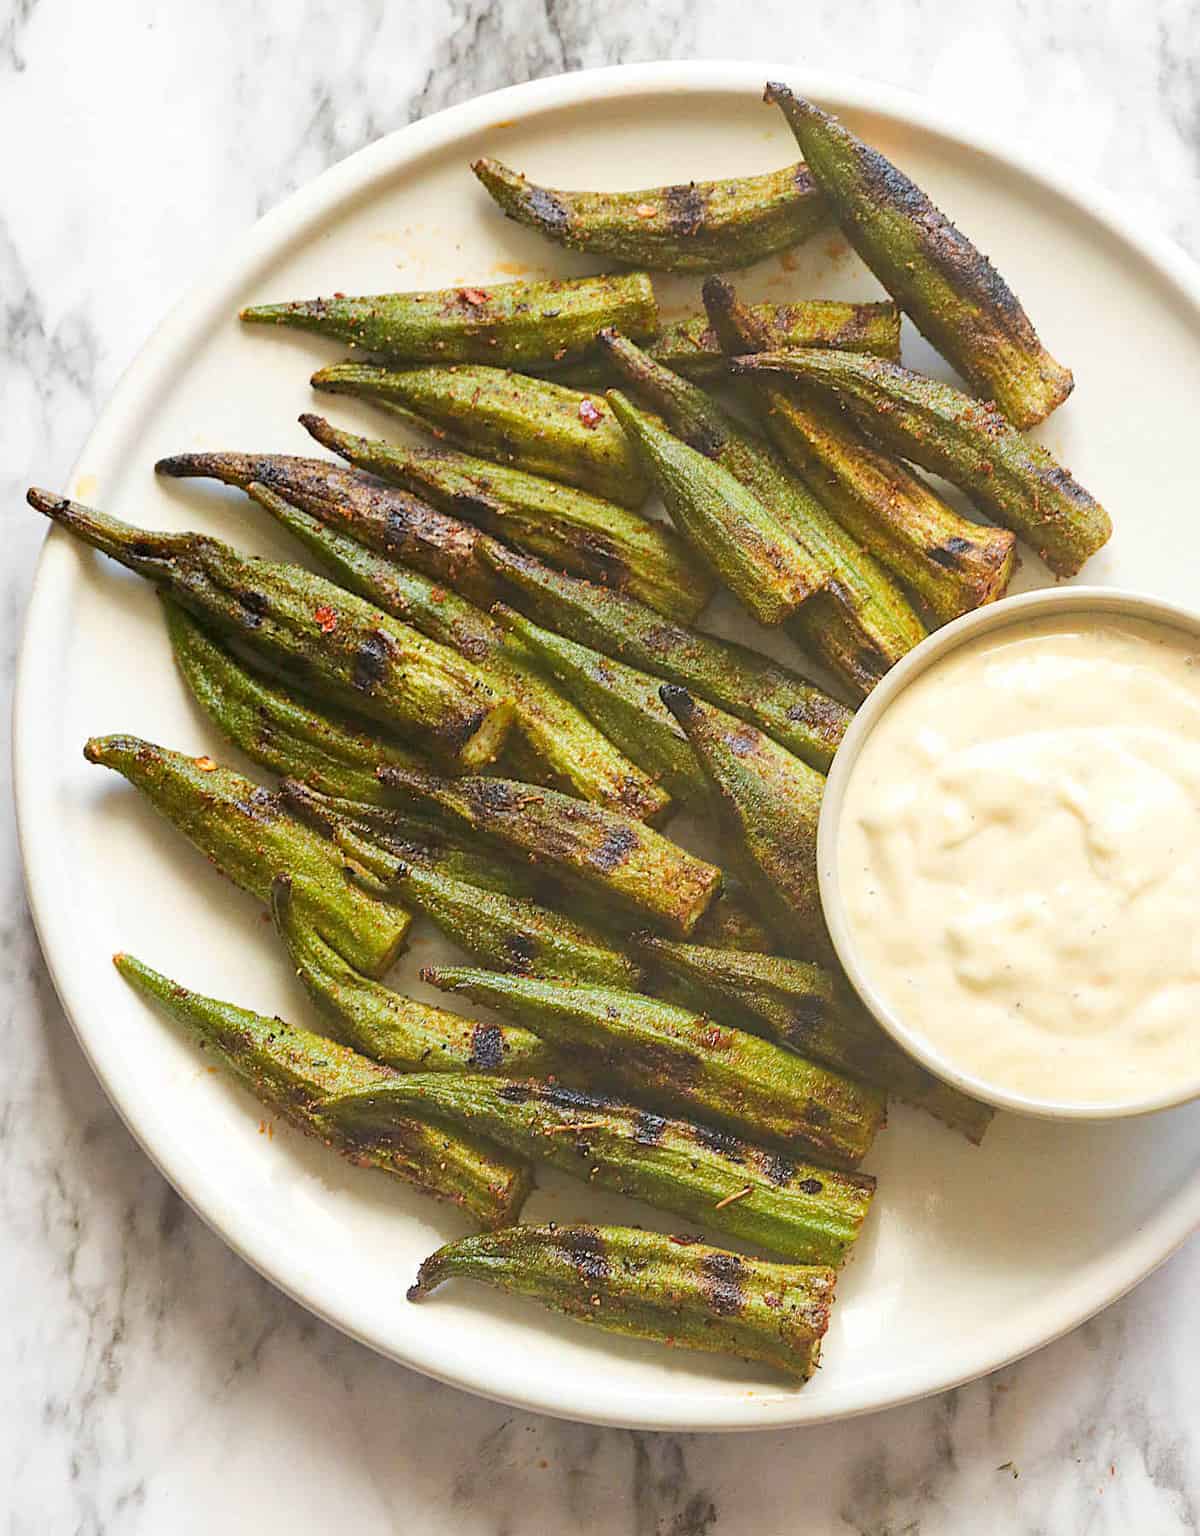 Check out this deliciously grilled okra with dipping sauce on Feed the Grill